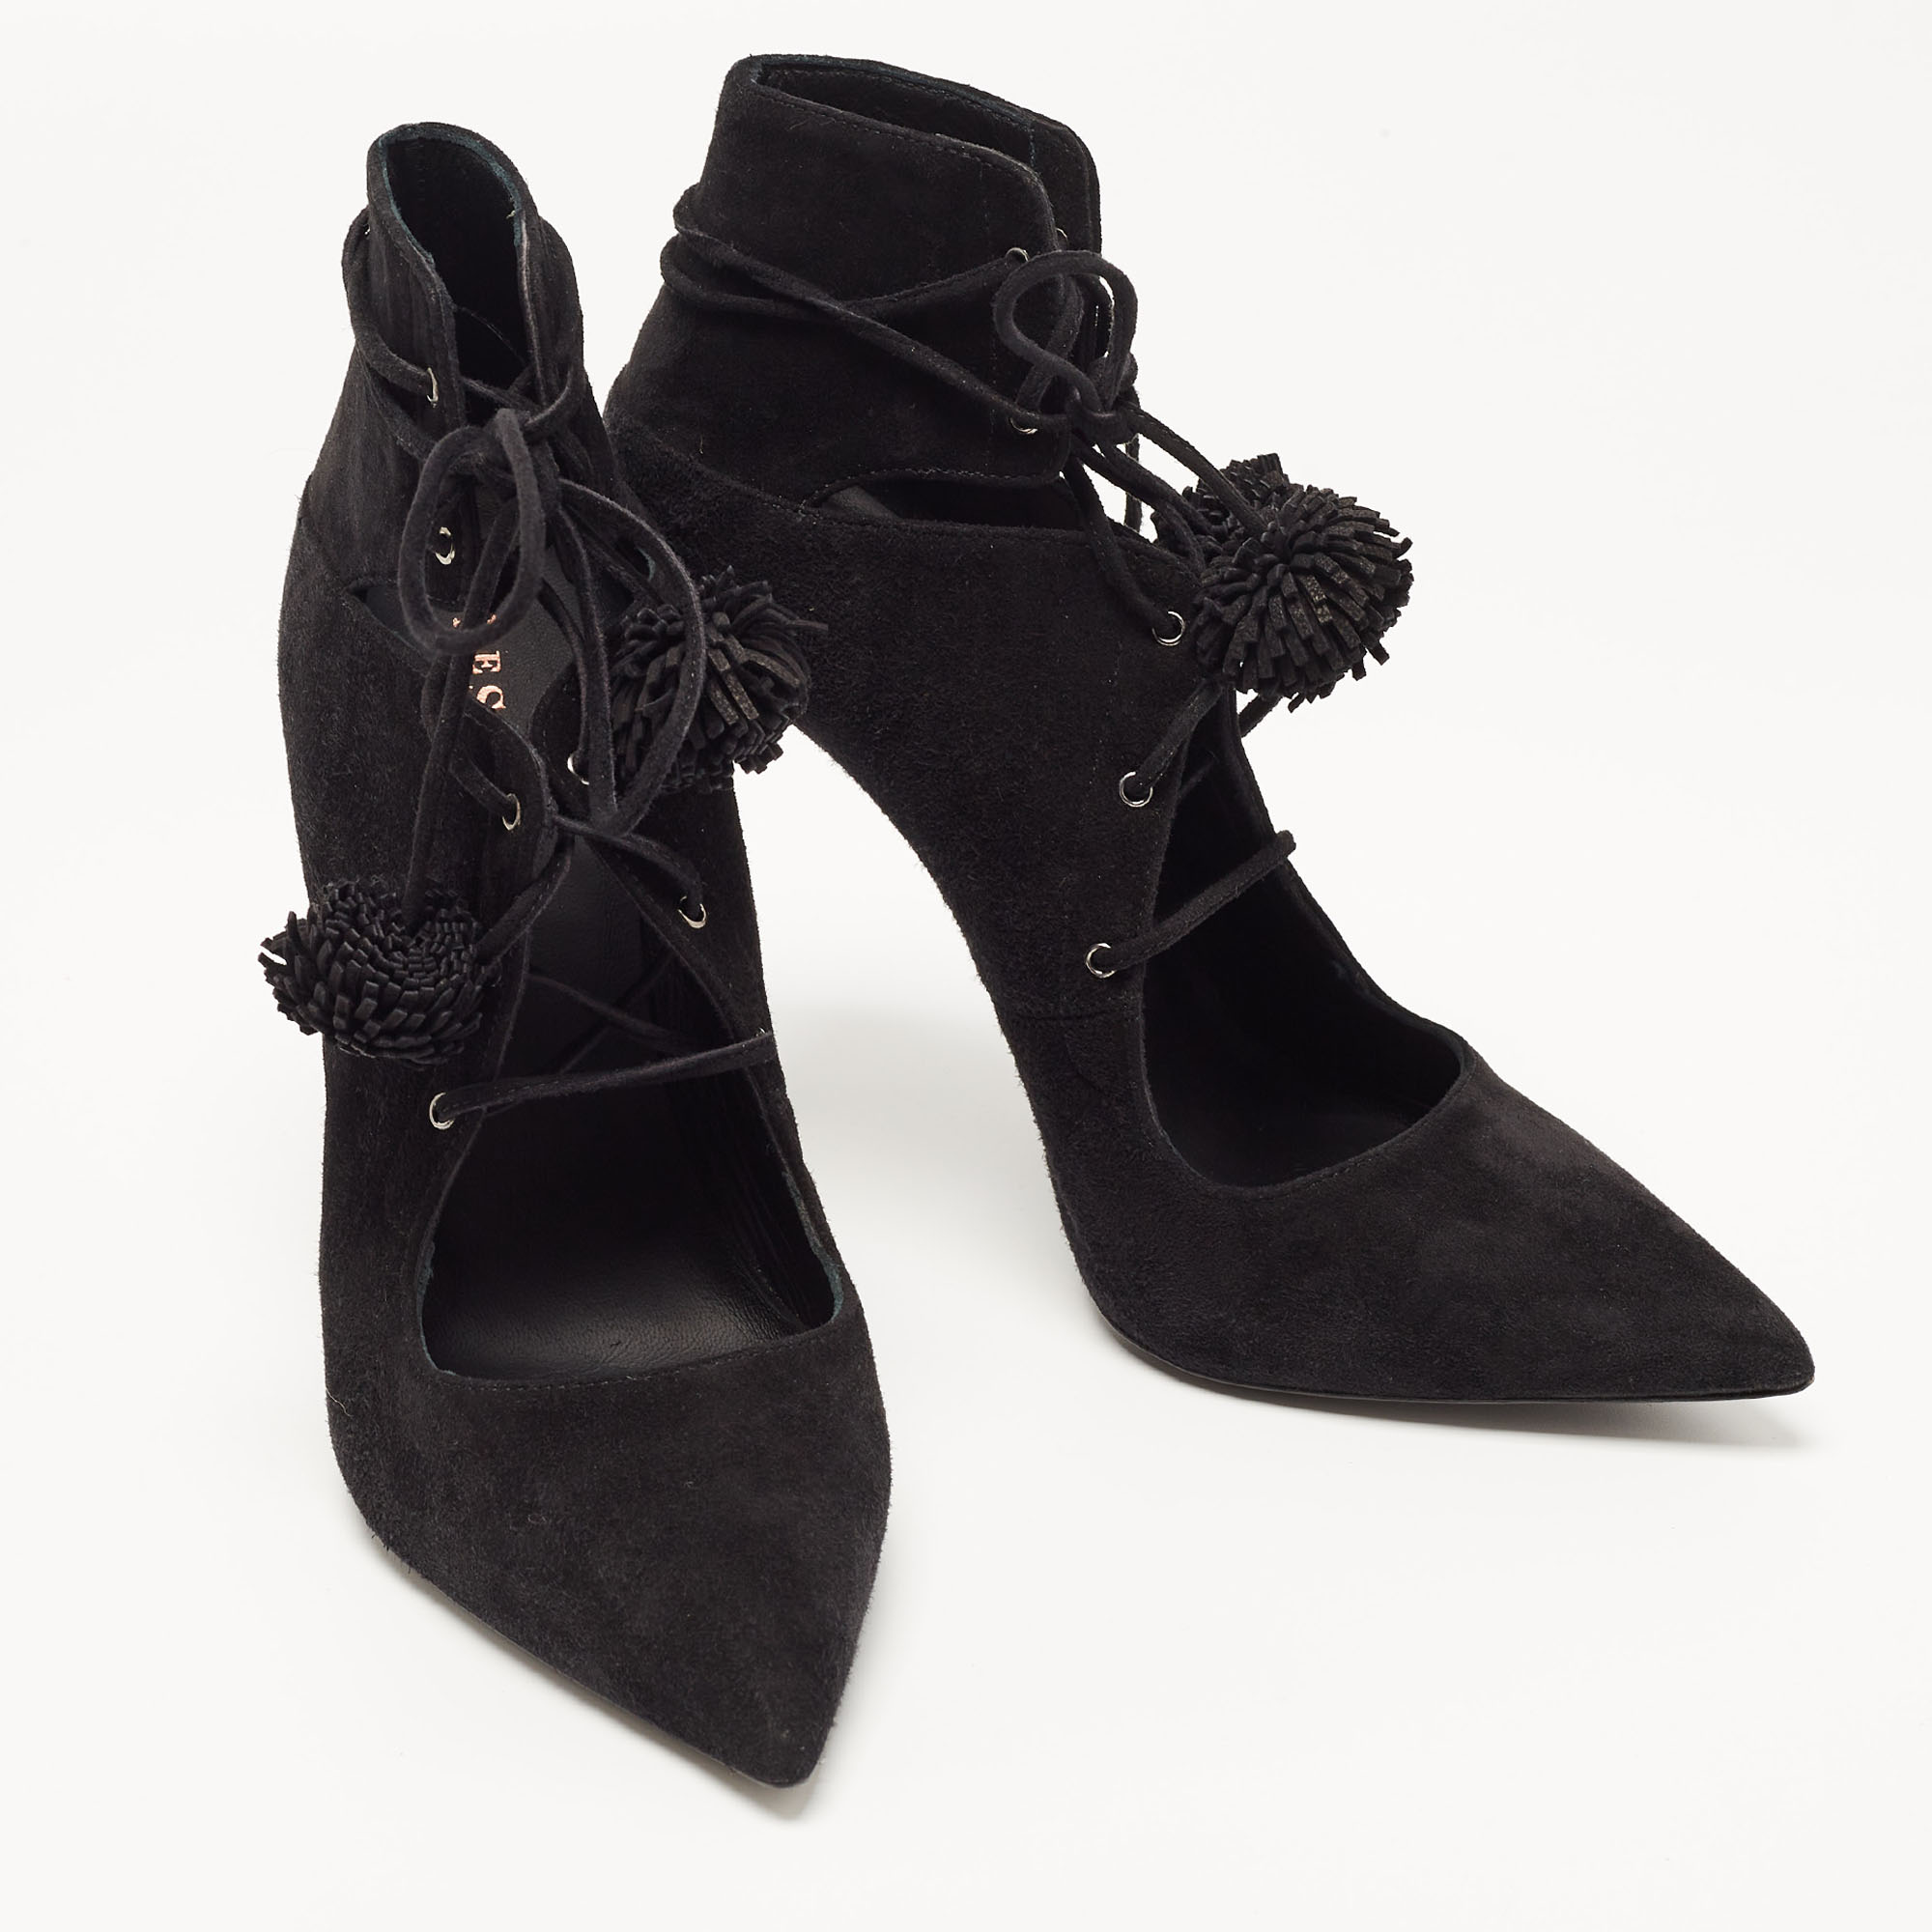 Le Silla Black Suede Lace Up Pointed Toe Ankle Booties 38.5